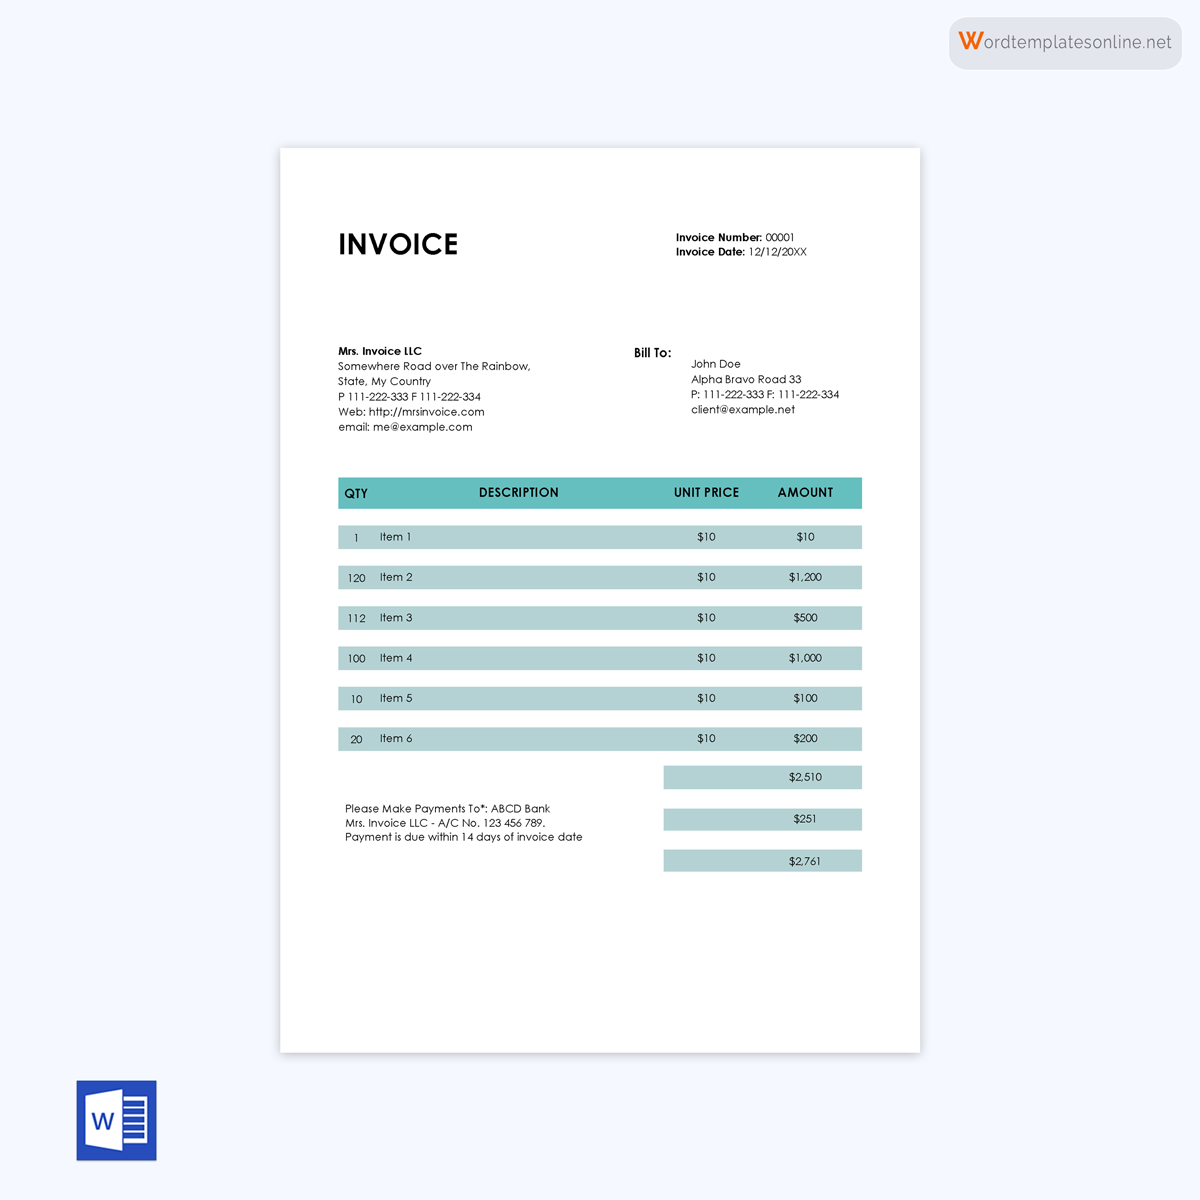 Printable invoice form with Word - Free Download